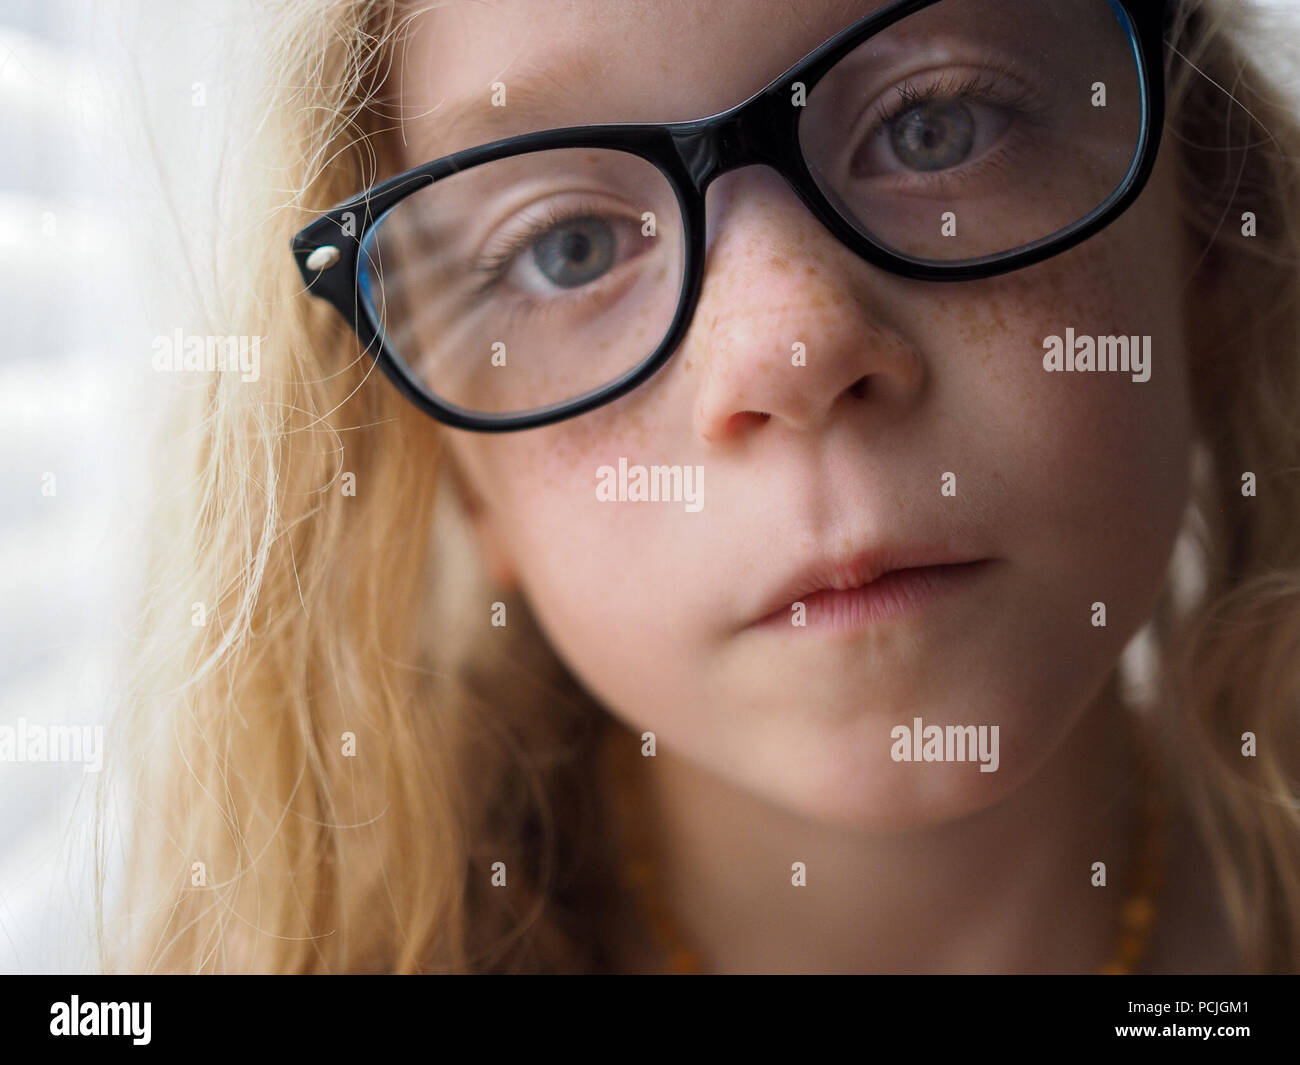 Portrait of a blonde girl with freckles wearing glasses Stock Photo